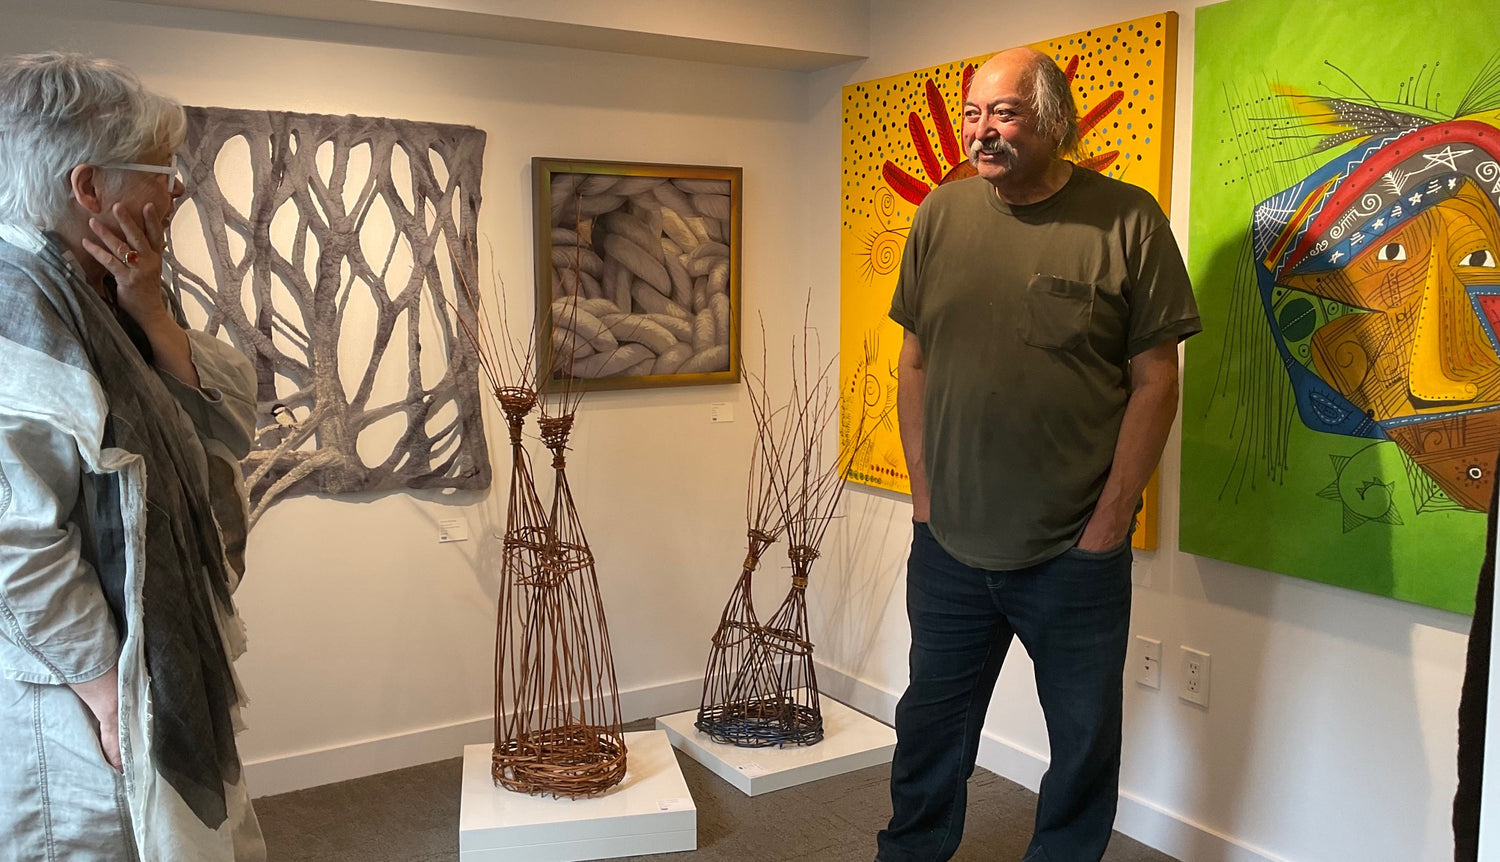 Mi'kmaq Artist Alan Syliboy standing in front of two of his paintings at The Prow Gallery in Halifax.